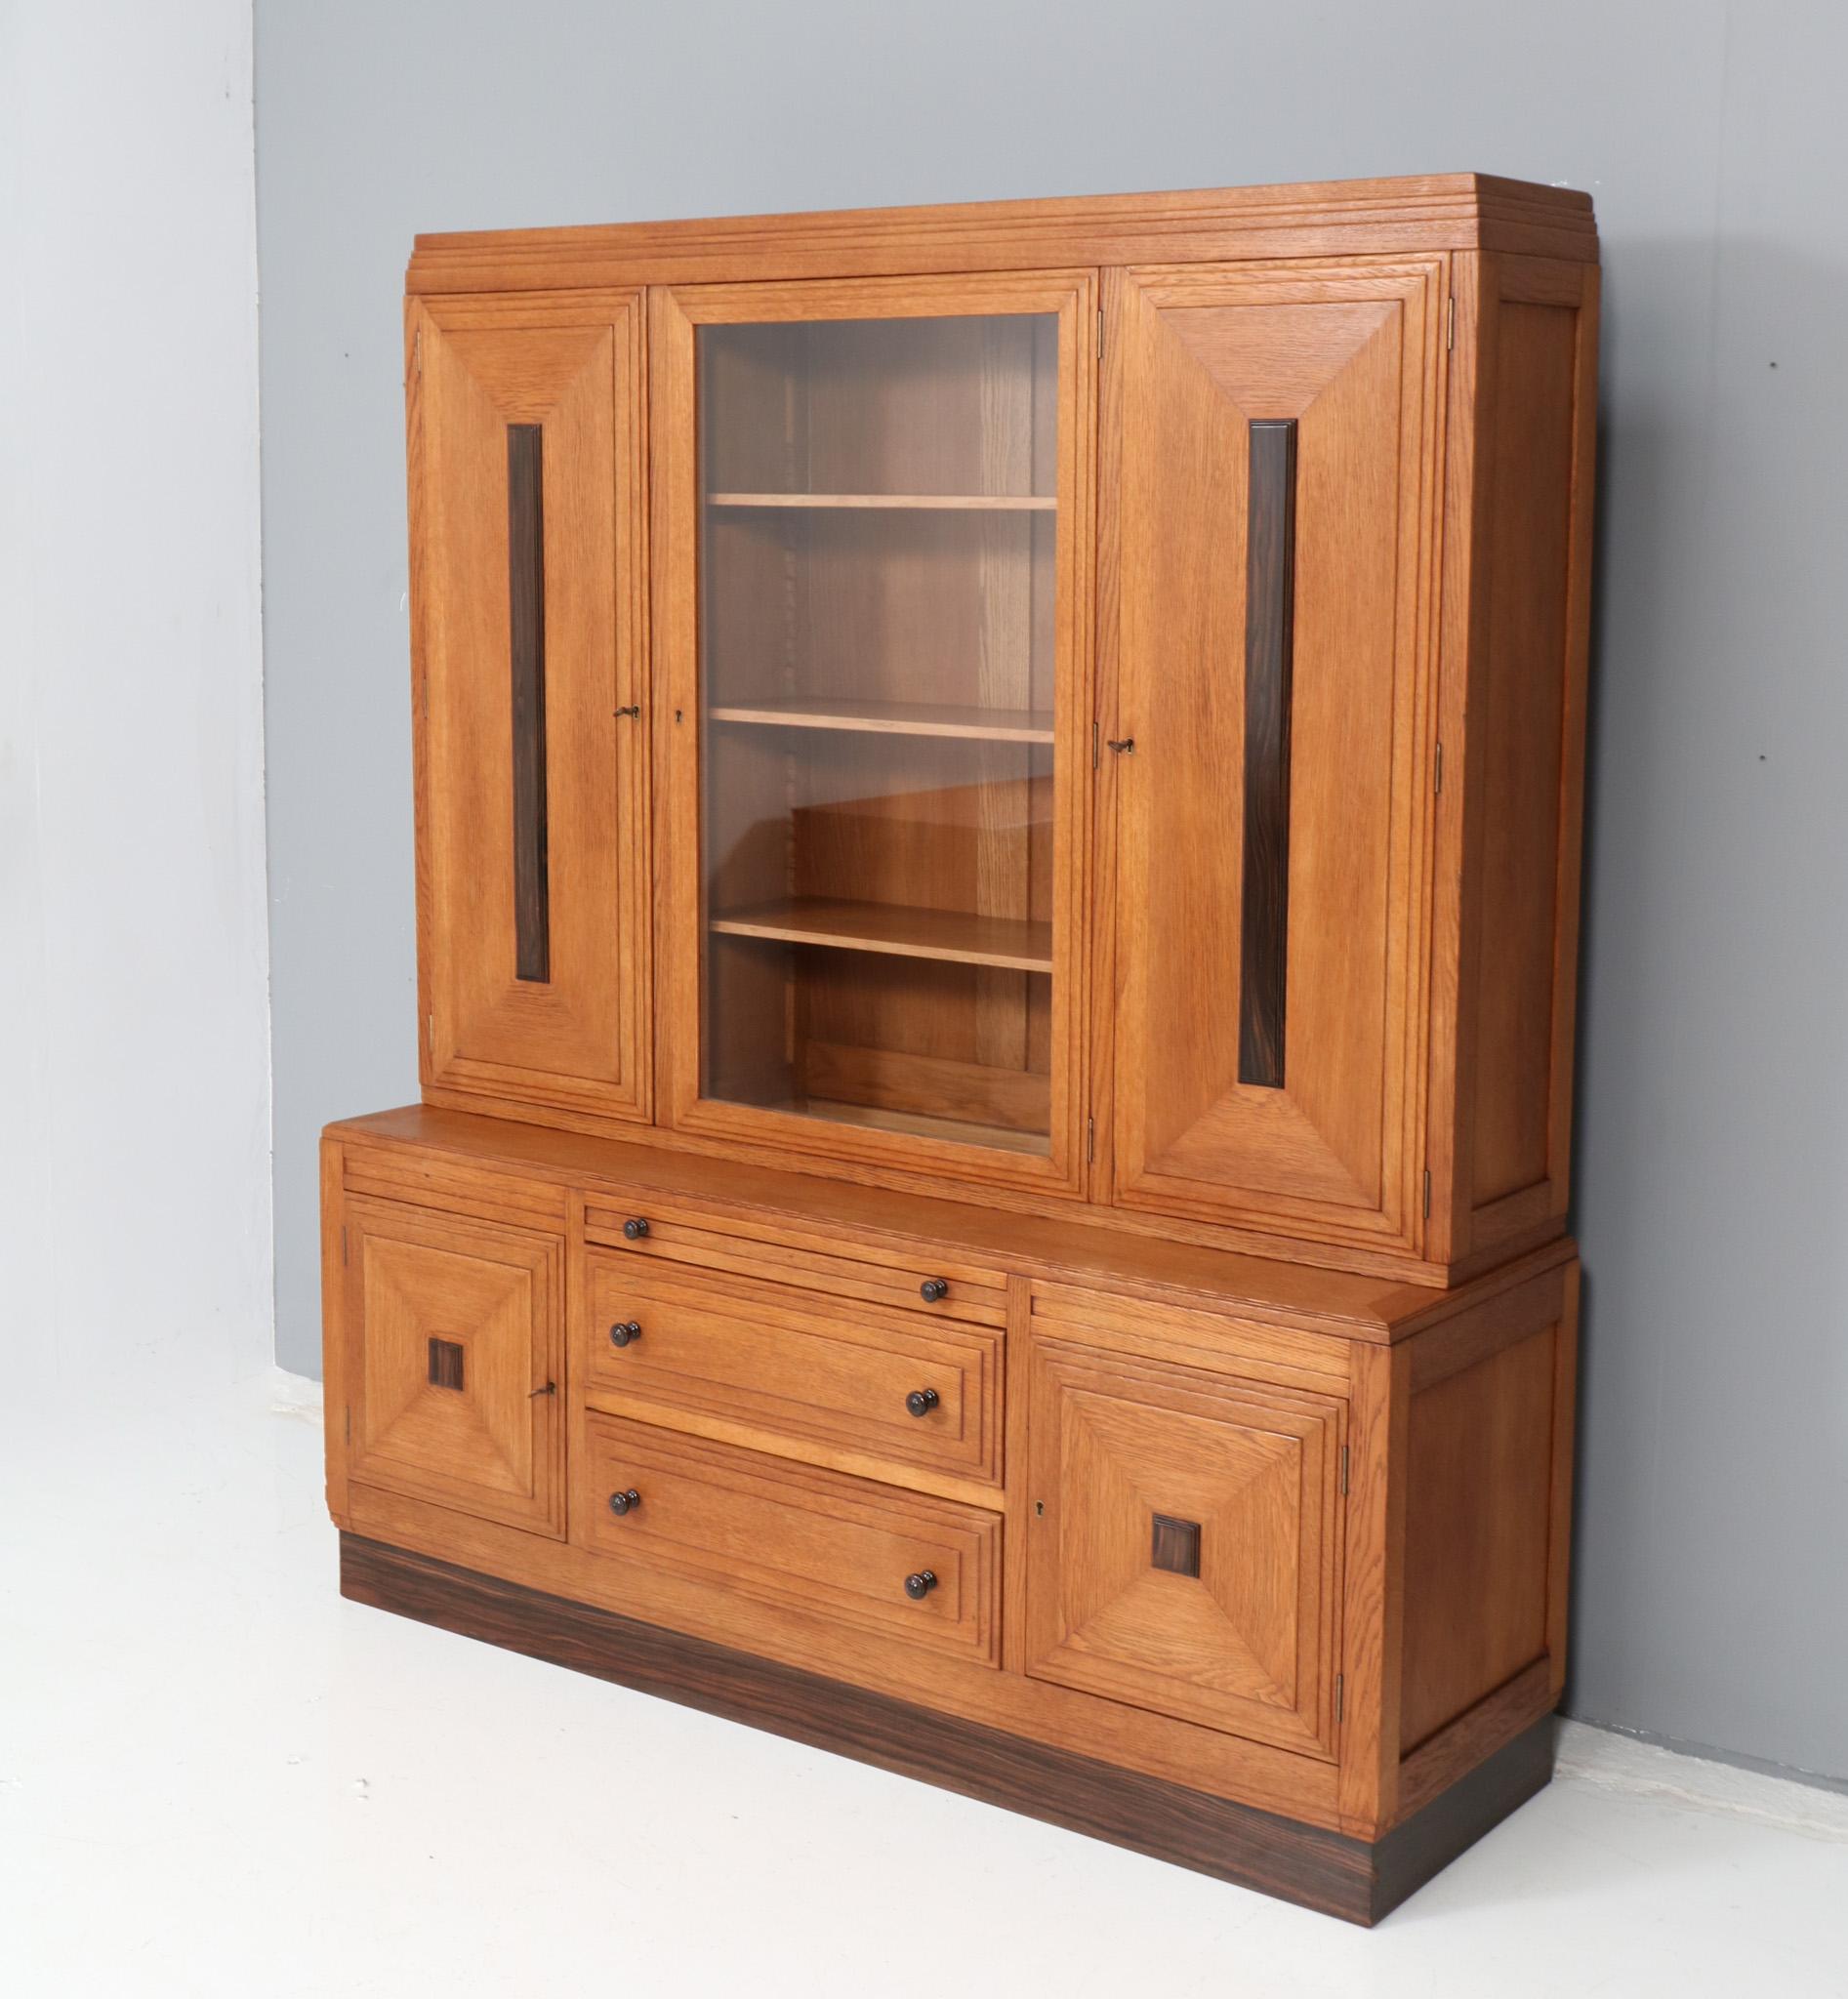 Magnificent and ultra rare Art Deco Amsterdamse School two-piece bookcase.
Design attributed to Piet Kramer for N.V. v/h A.M. Randoe en Zonen Haarlem.
Striking Dutch design from the 1920s.
Solid oak base with original solid macassar ebony knobs on